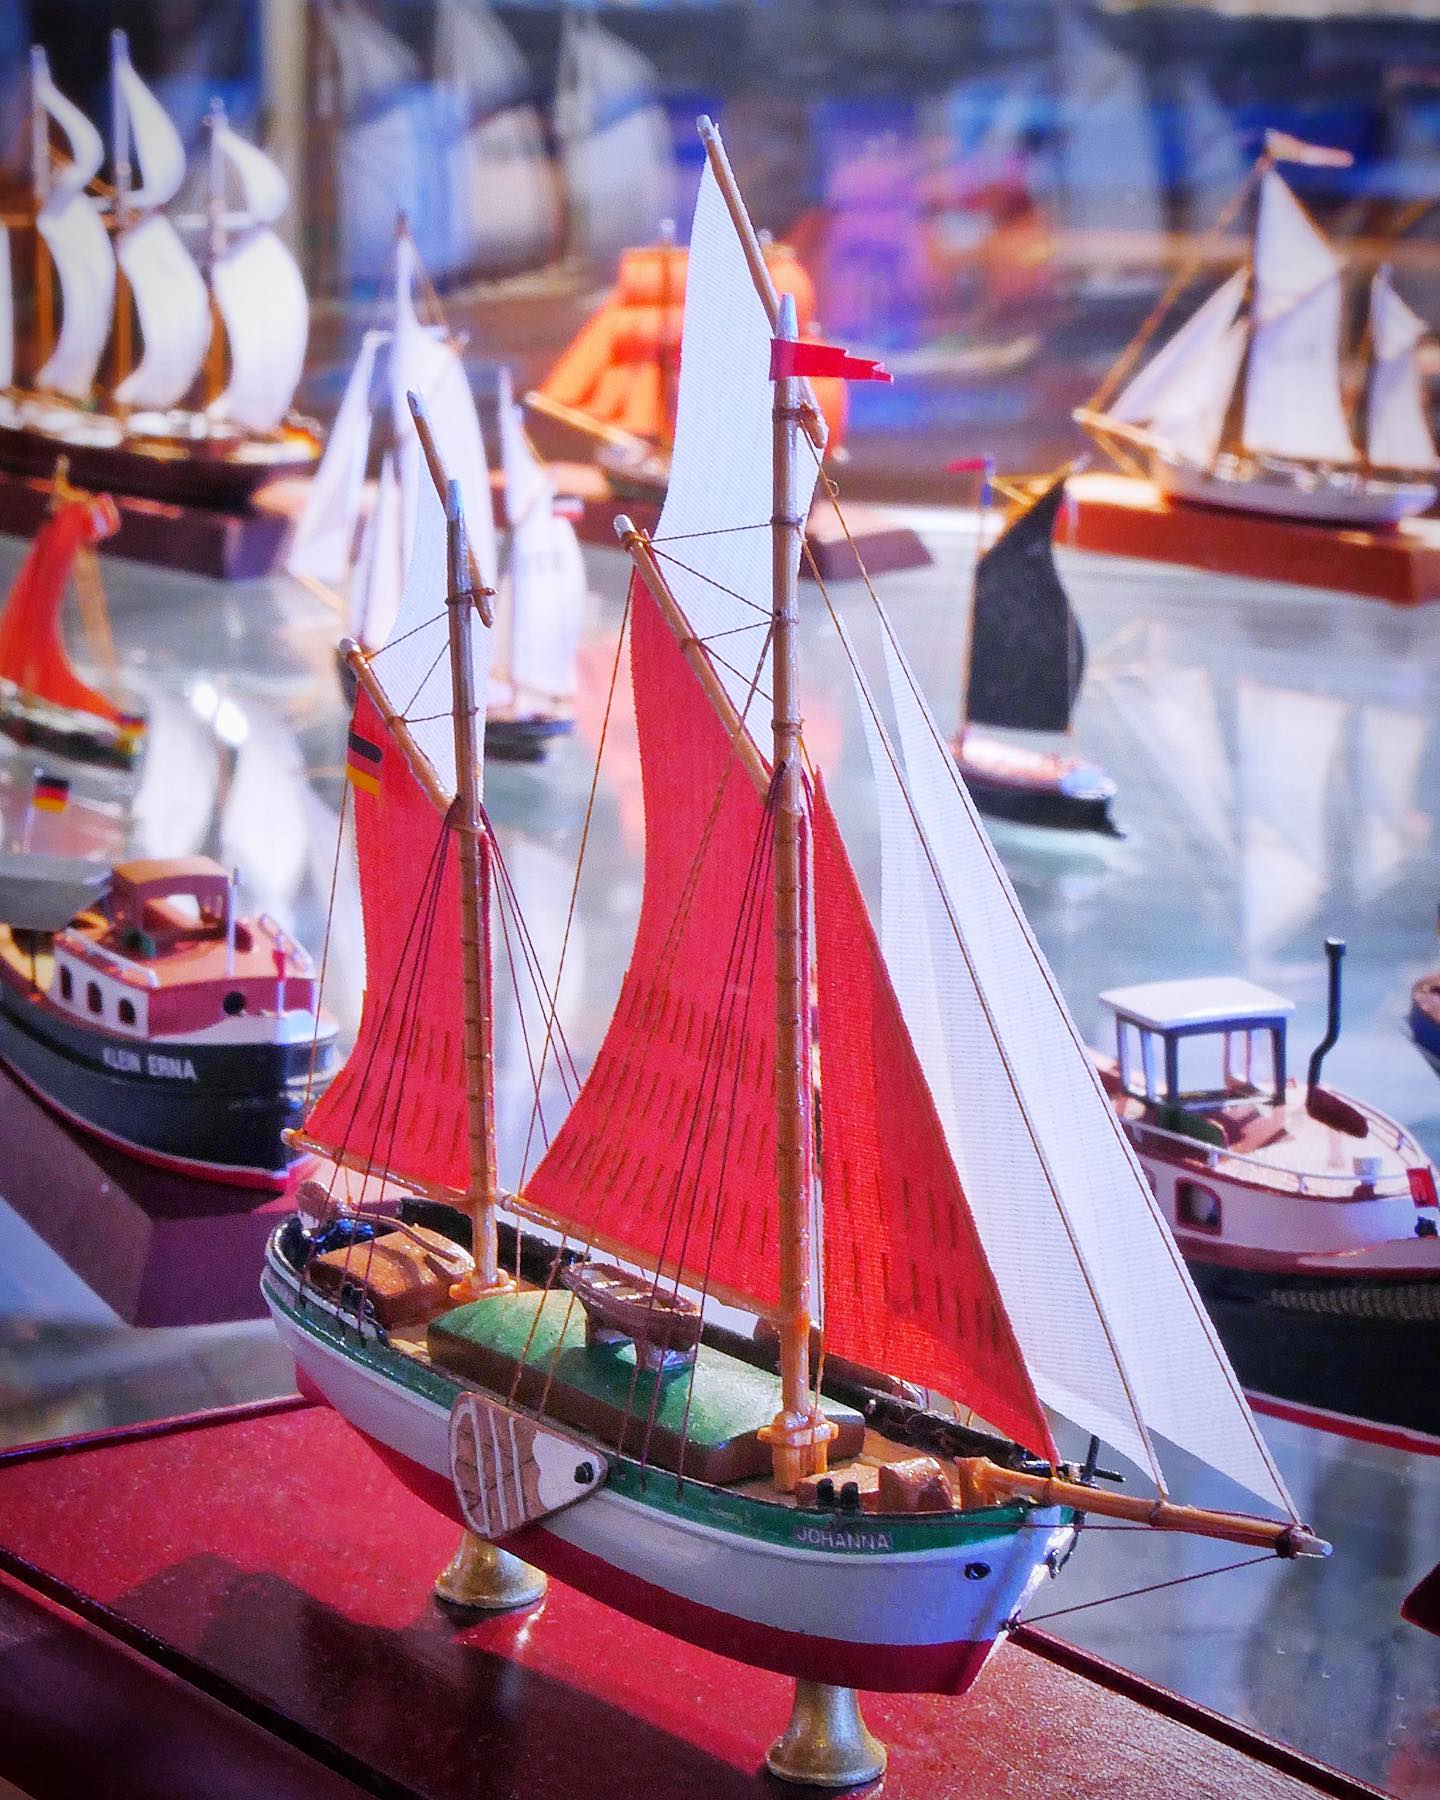 Sailing boat Johanna. She is a traditional Ewer. This miniature in a scale of 1:220 is displayed on deck 9 of the museum.